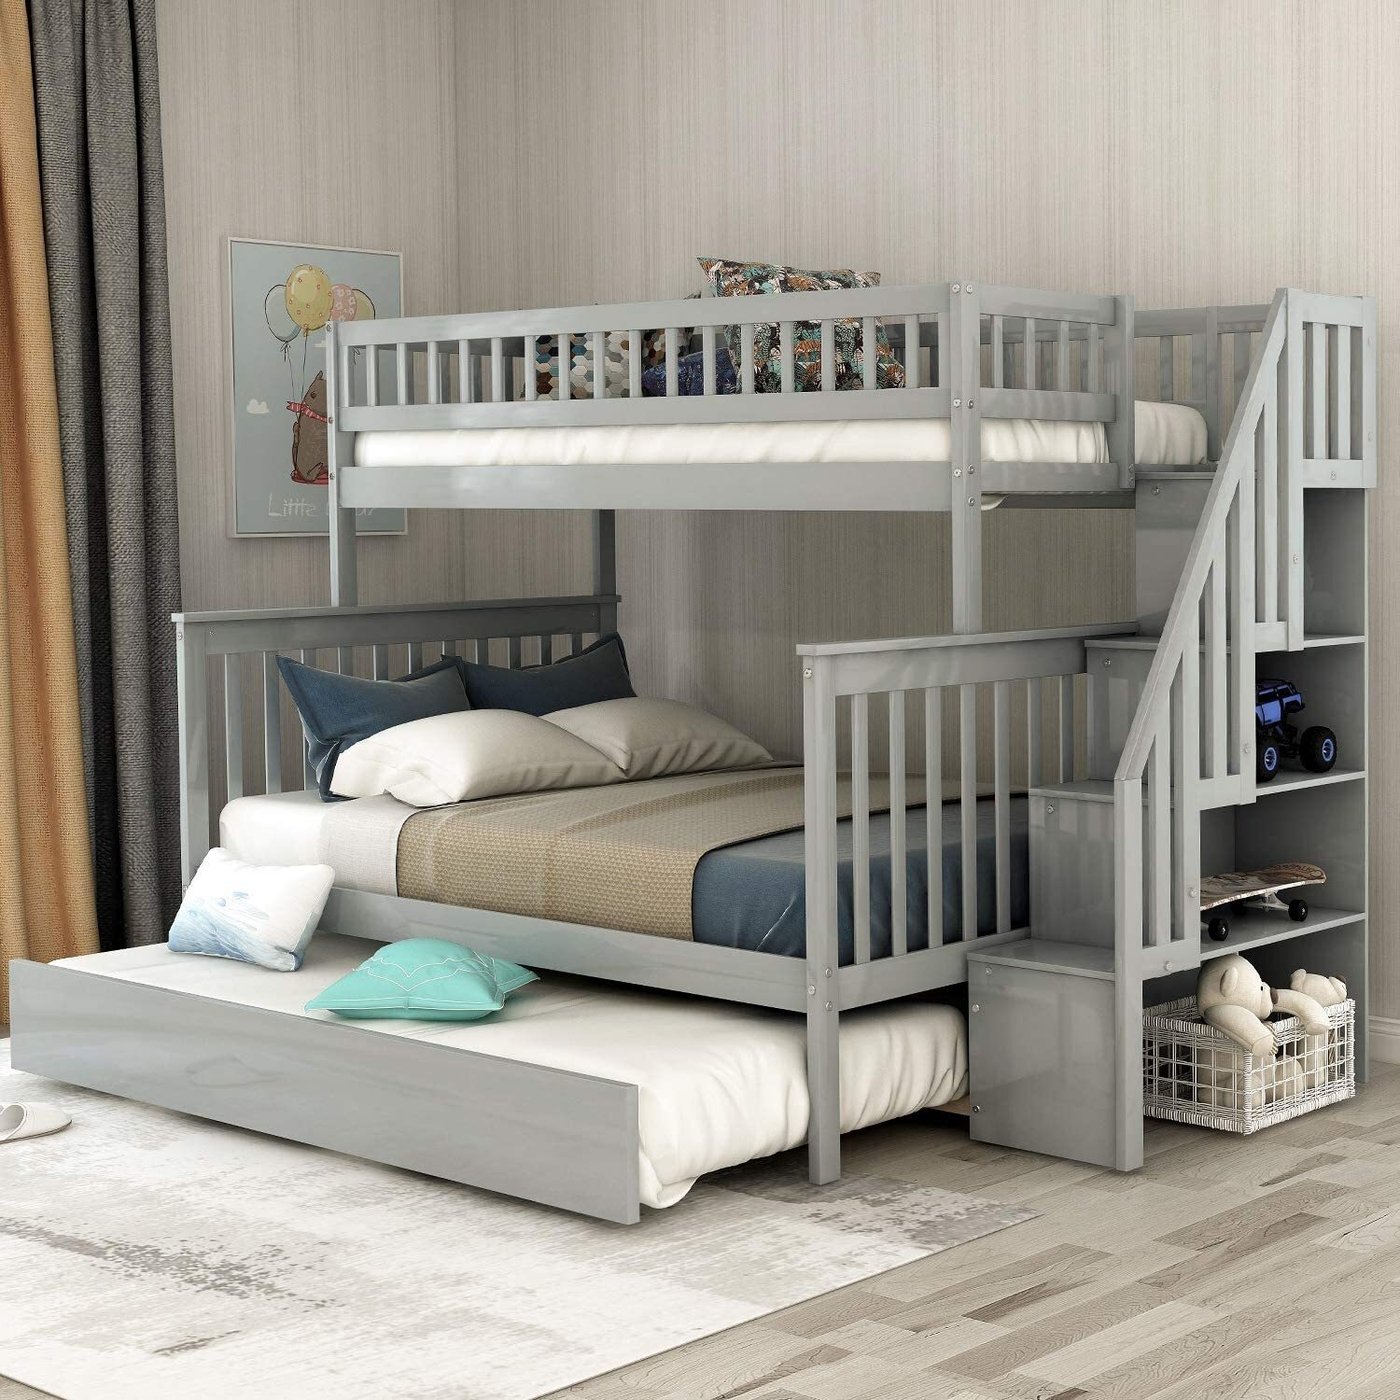 7 Cool Designs For Triple Bunk Beds Foter